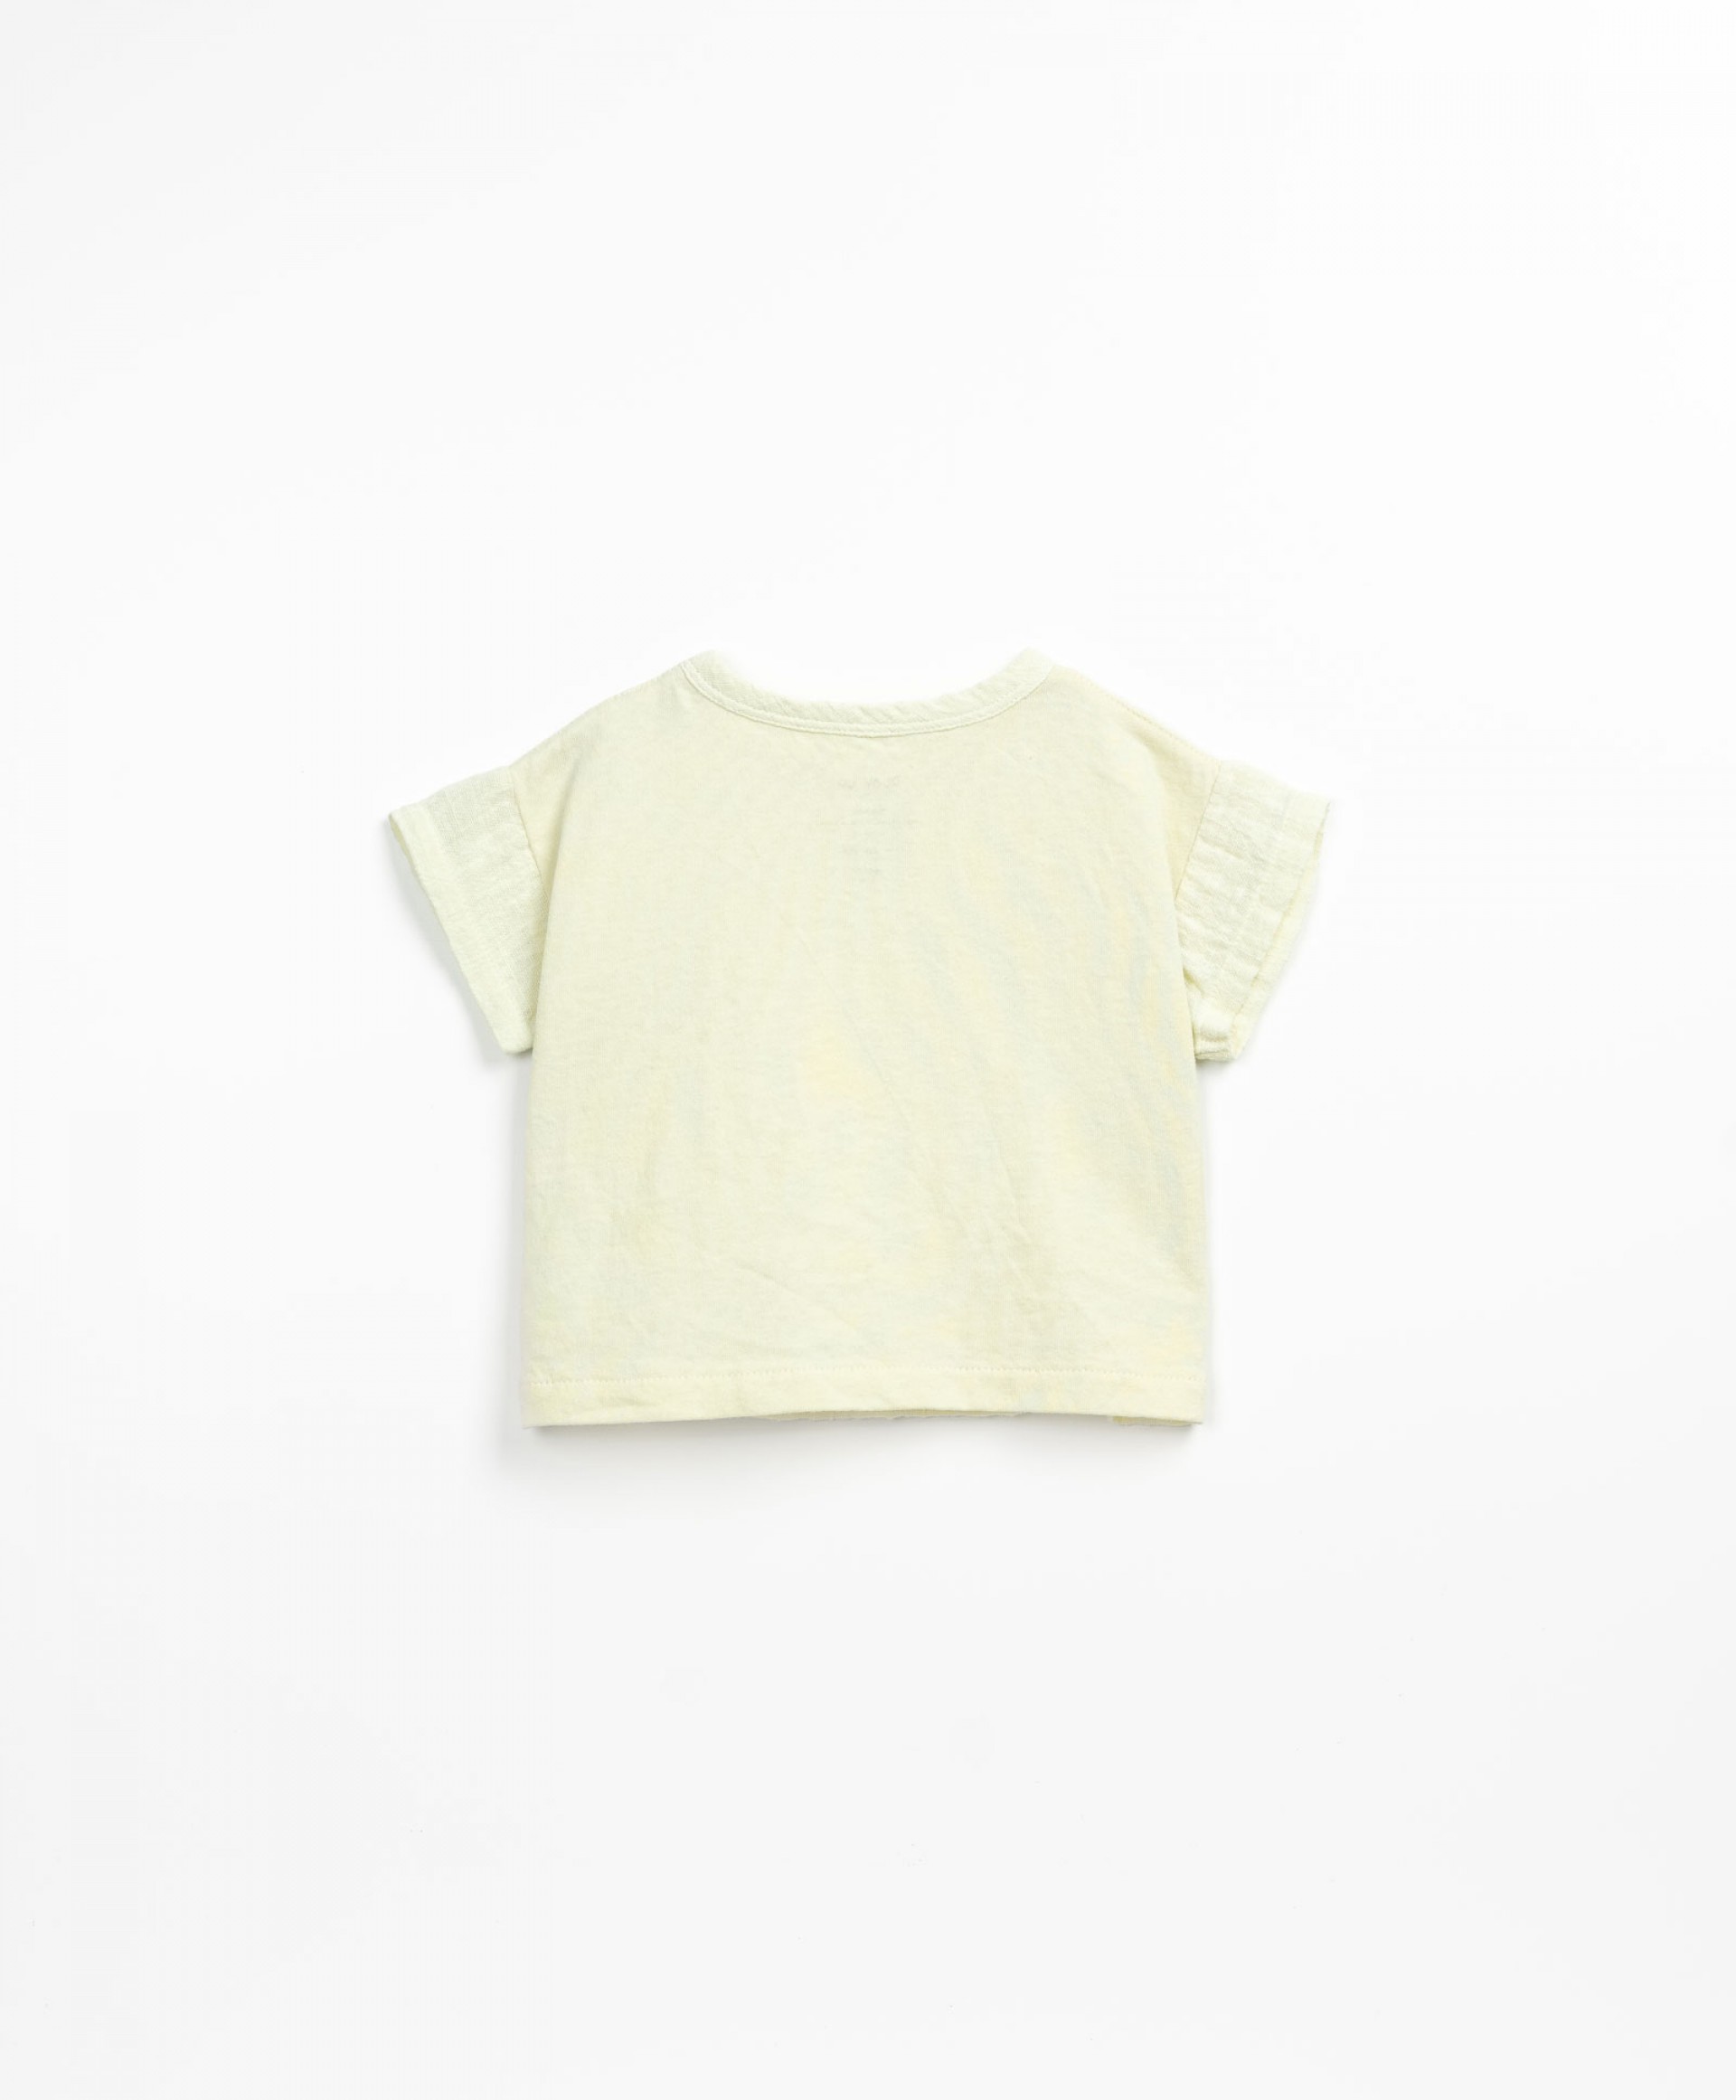 T-shirt in a mixture of organic cotton and recycled cotton. | Textile Art